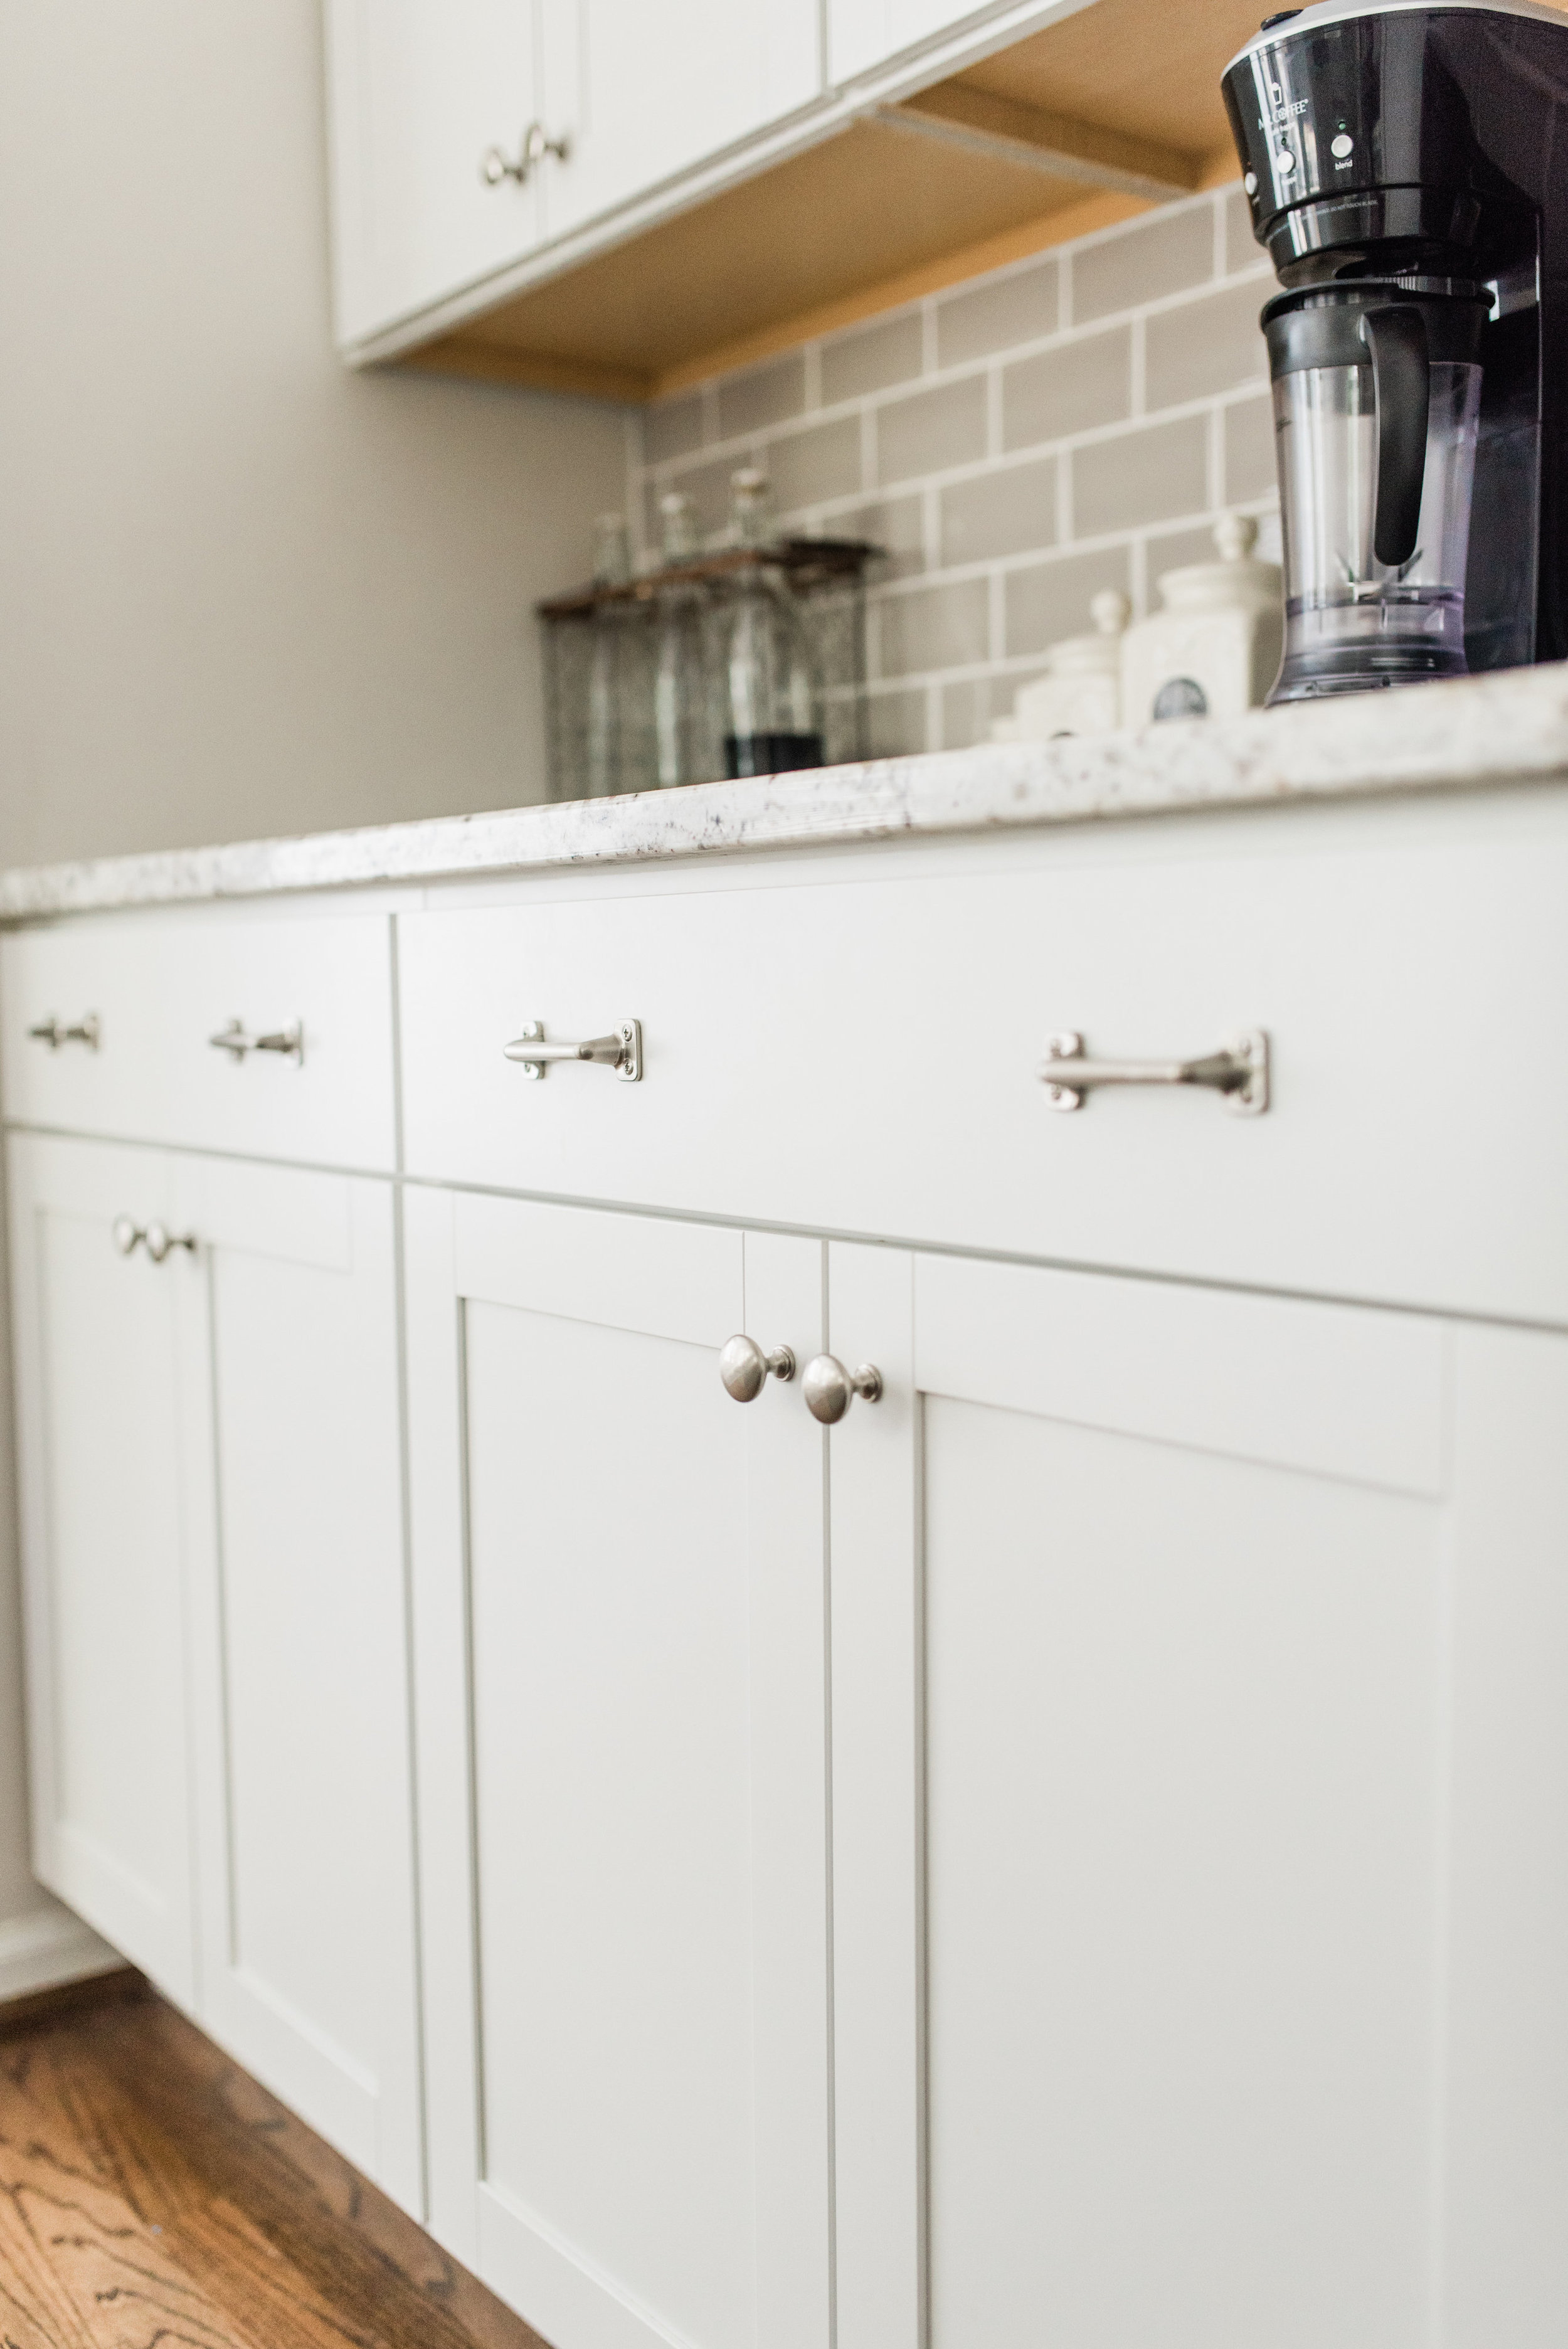 Lowes Stock Cabinets Review Diamond Now Arcadia White Shaker Cabinets Elizabeth Burns Design